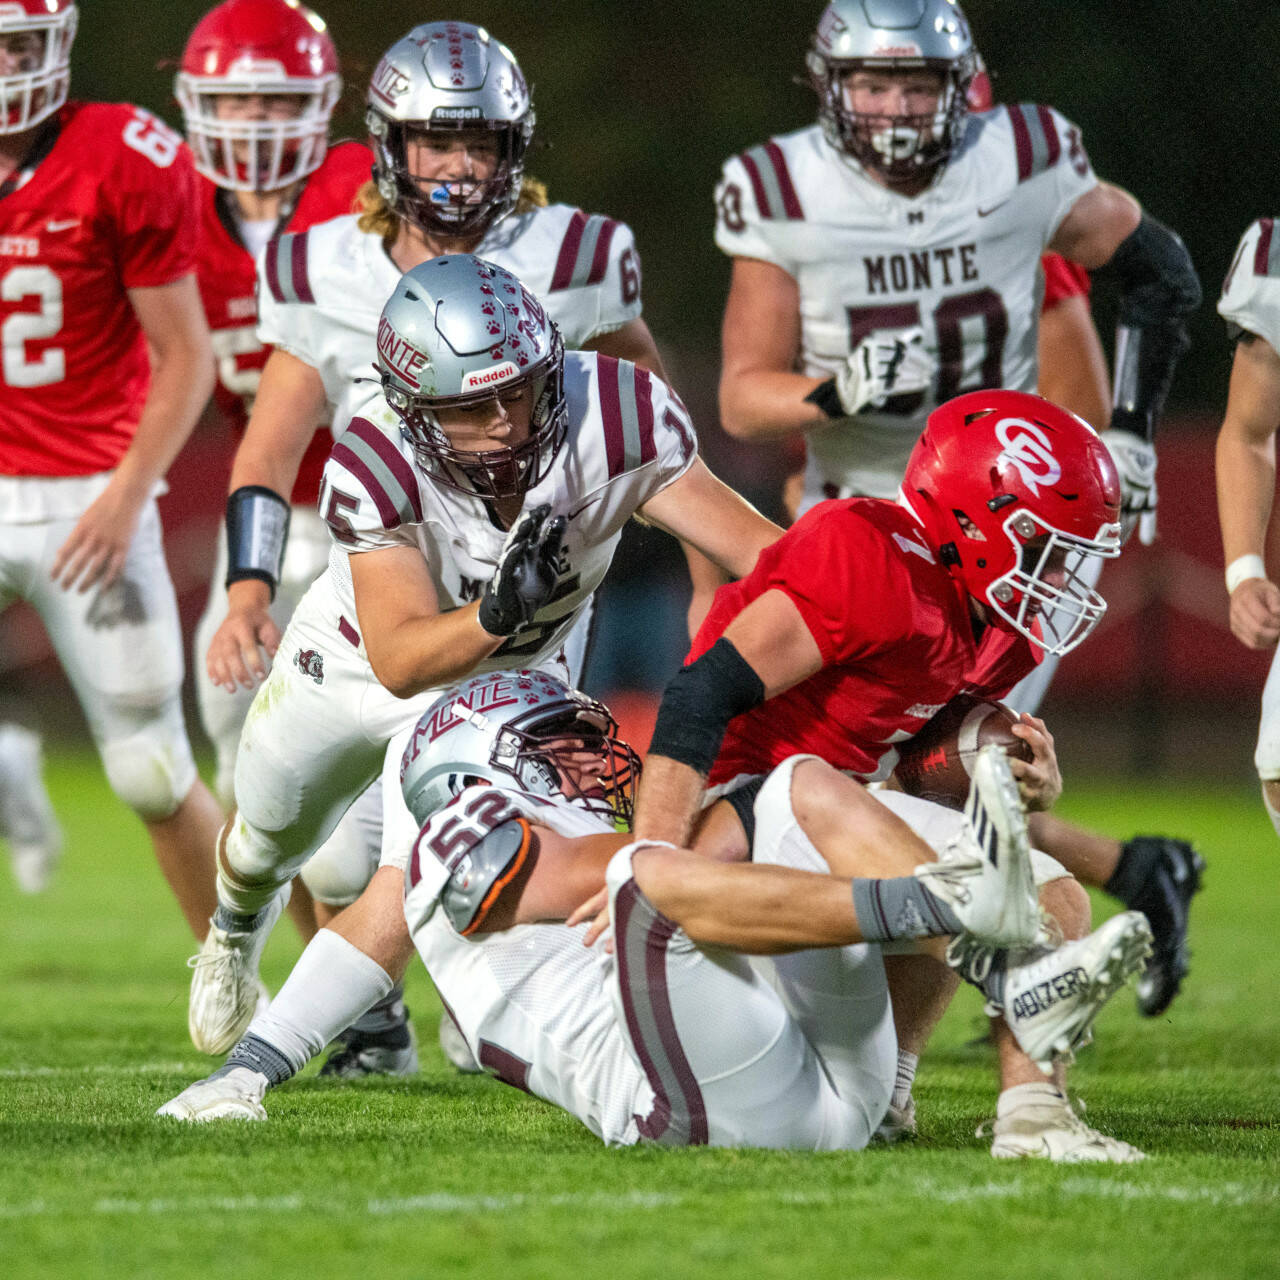 PHOTO BY FOREST WORGUM Montesano linebackers Peyton Damasiewicz (52) and Felix Romero (15) clamp down on Castle Rock running back Ian Burton during the Bulldogs’ 35-7 win on Thursday at Castle Rock High School.